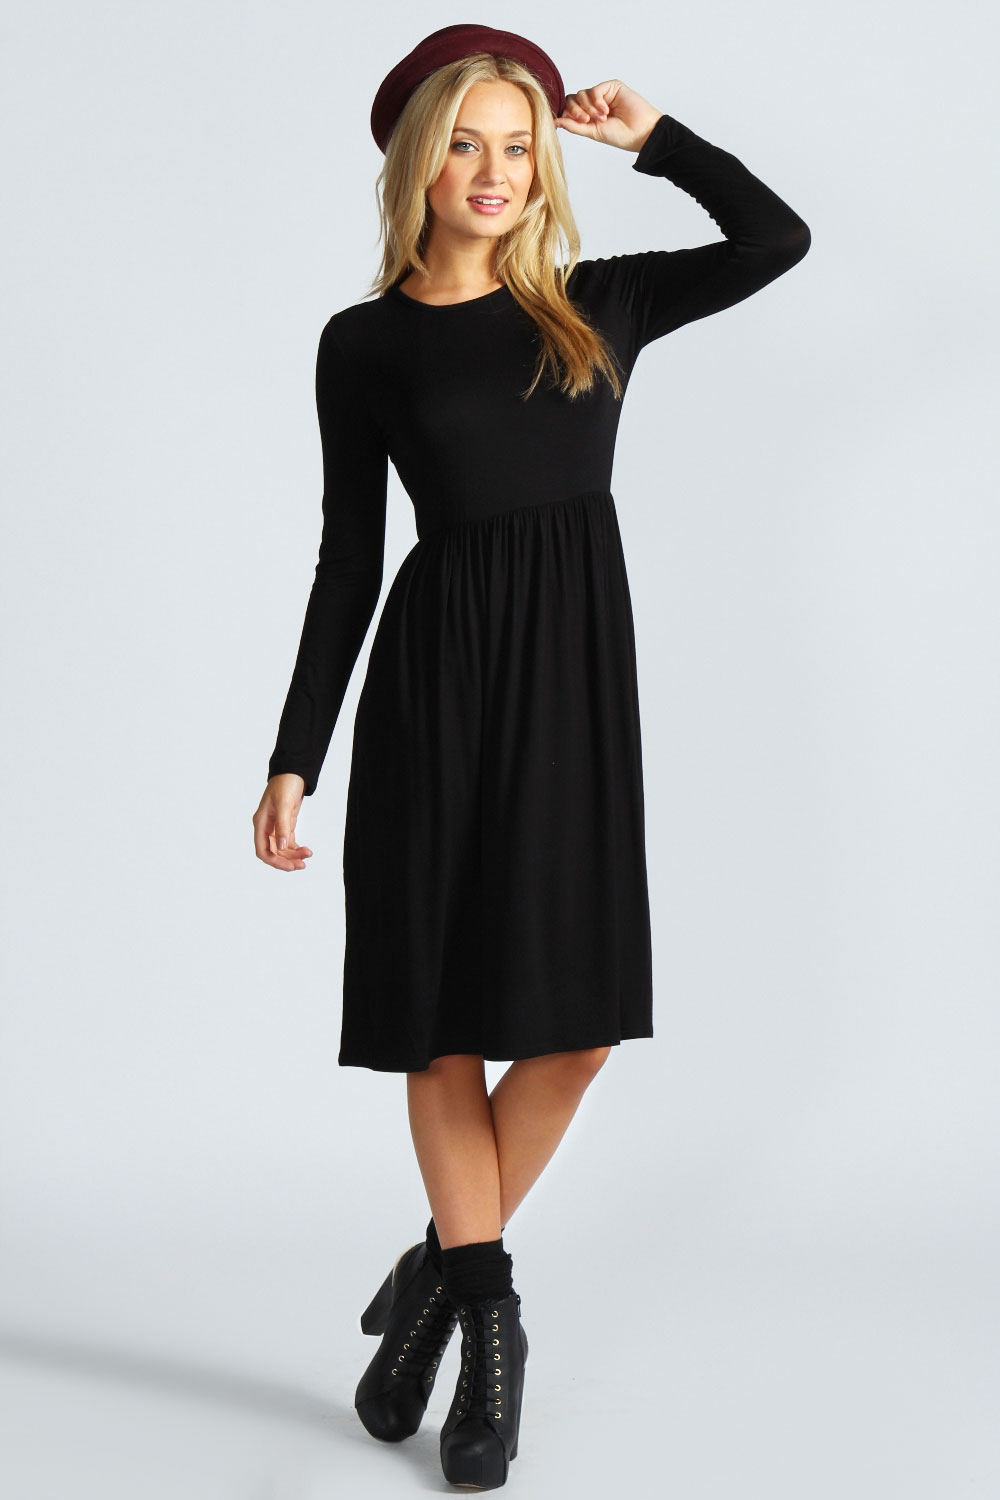 Long Sleeve Midi Dress Picture Collection | Dressed Up Girl